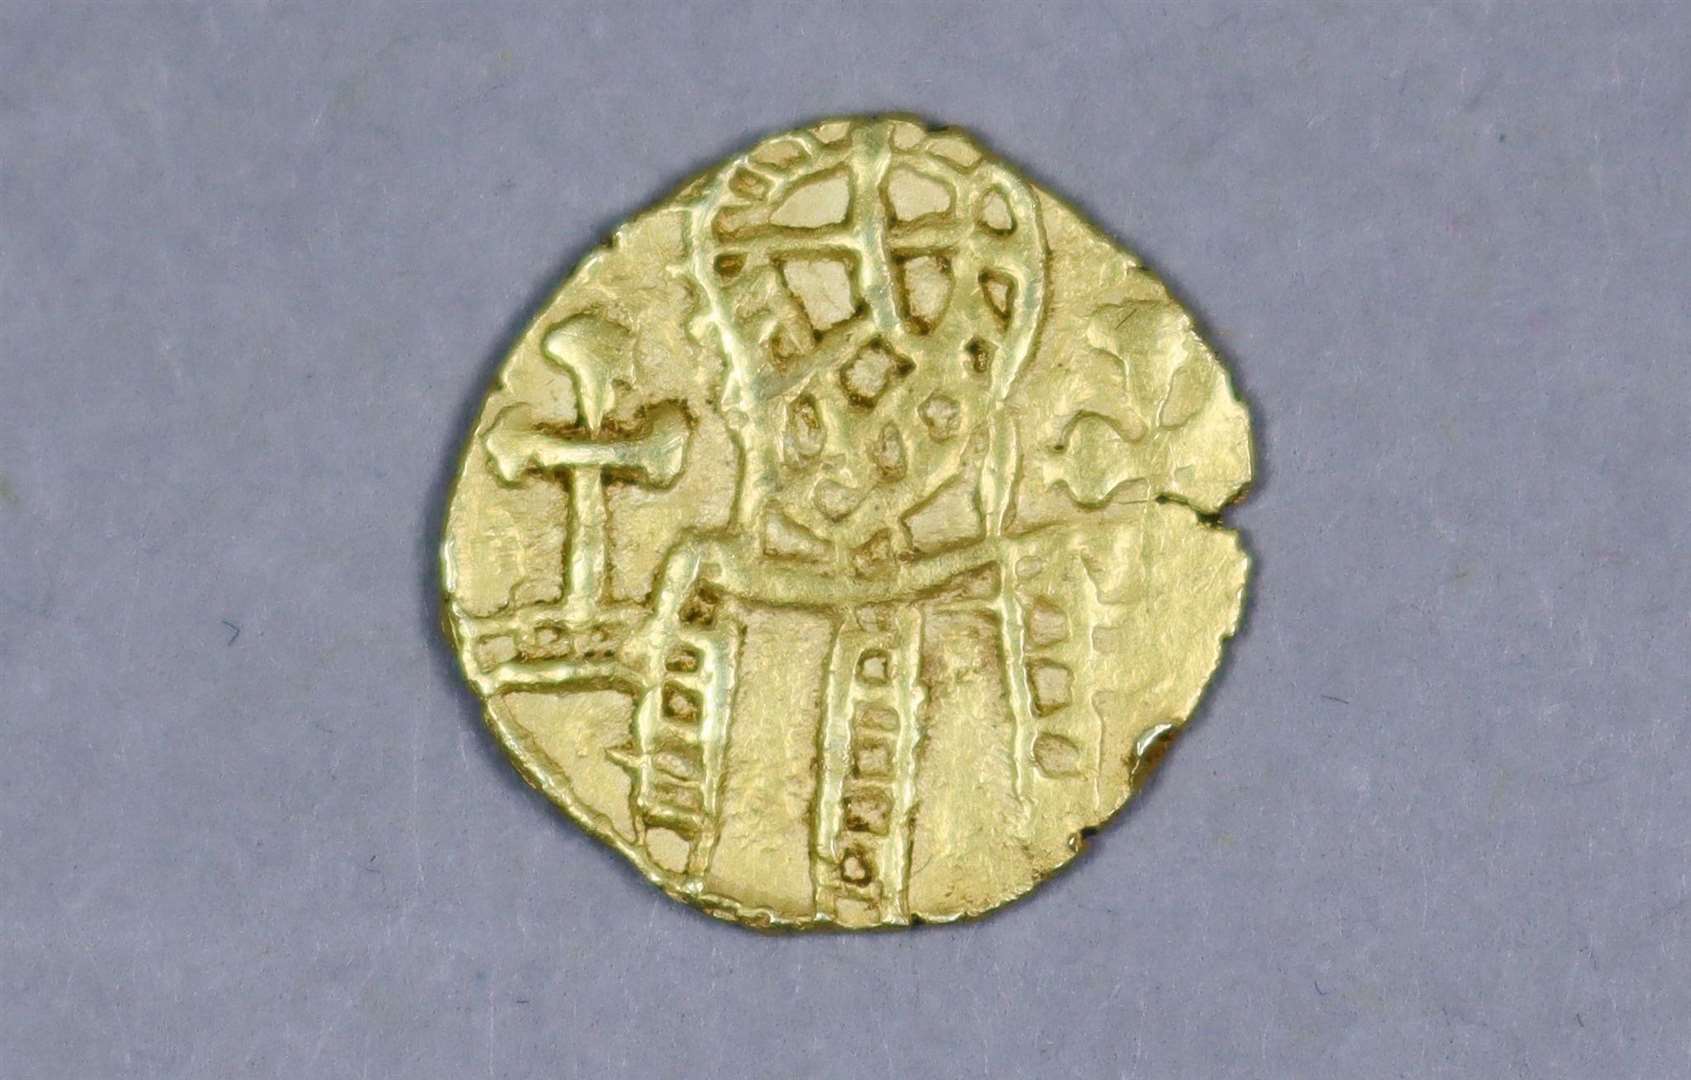 An extremely rare gold Thrymsa, or shilling, dating from 640-660, is valued at up to £12,000